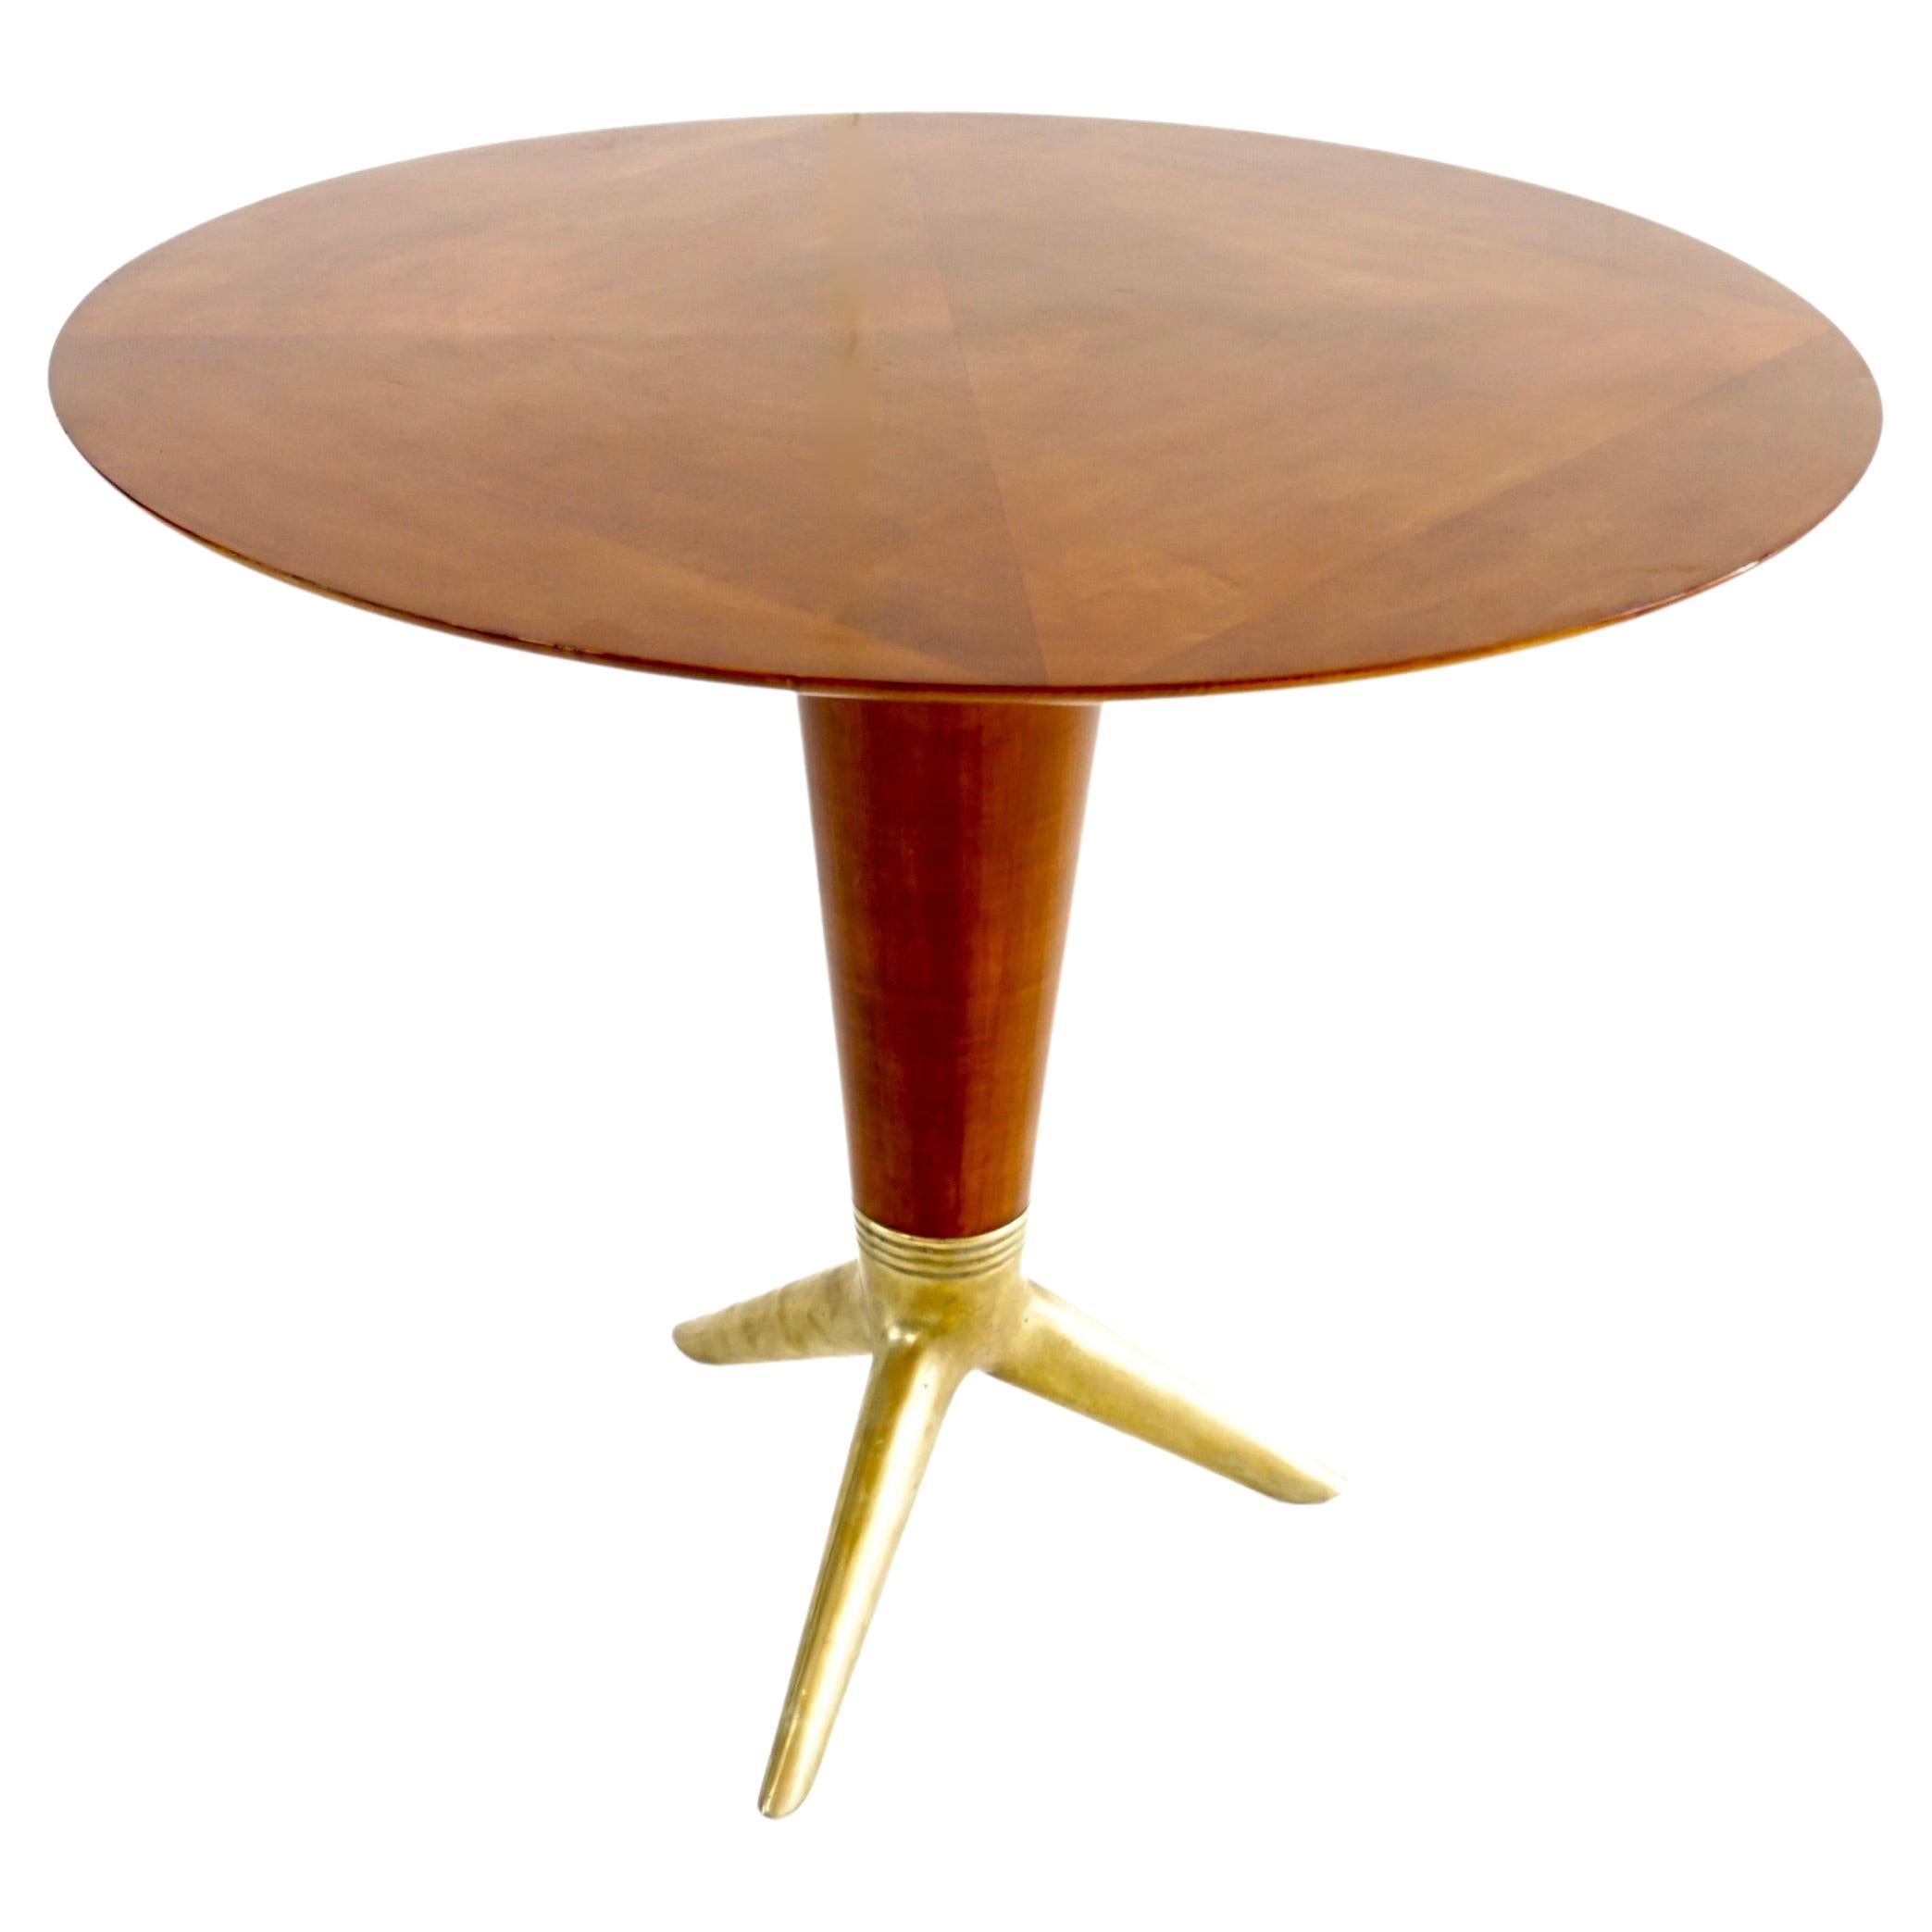 Rare Maple and Brass Round Center Table by I.S.A. Bergamo 1950